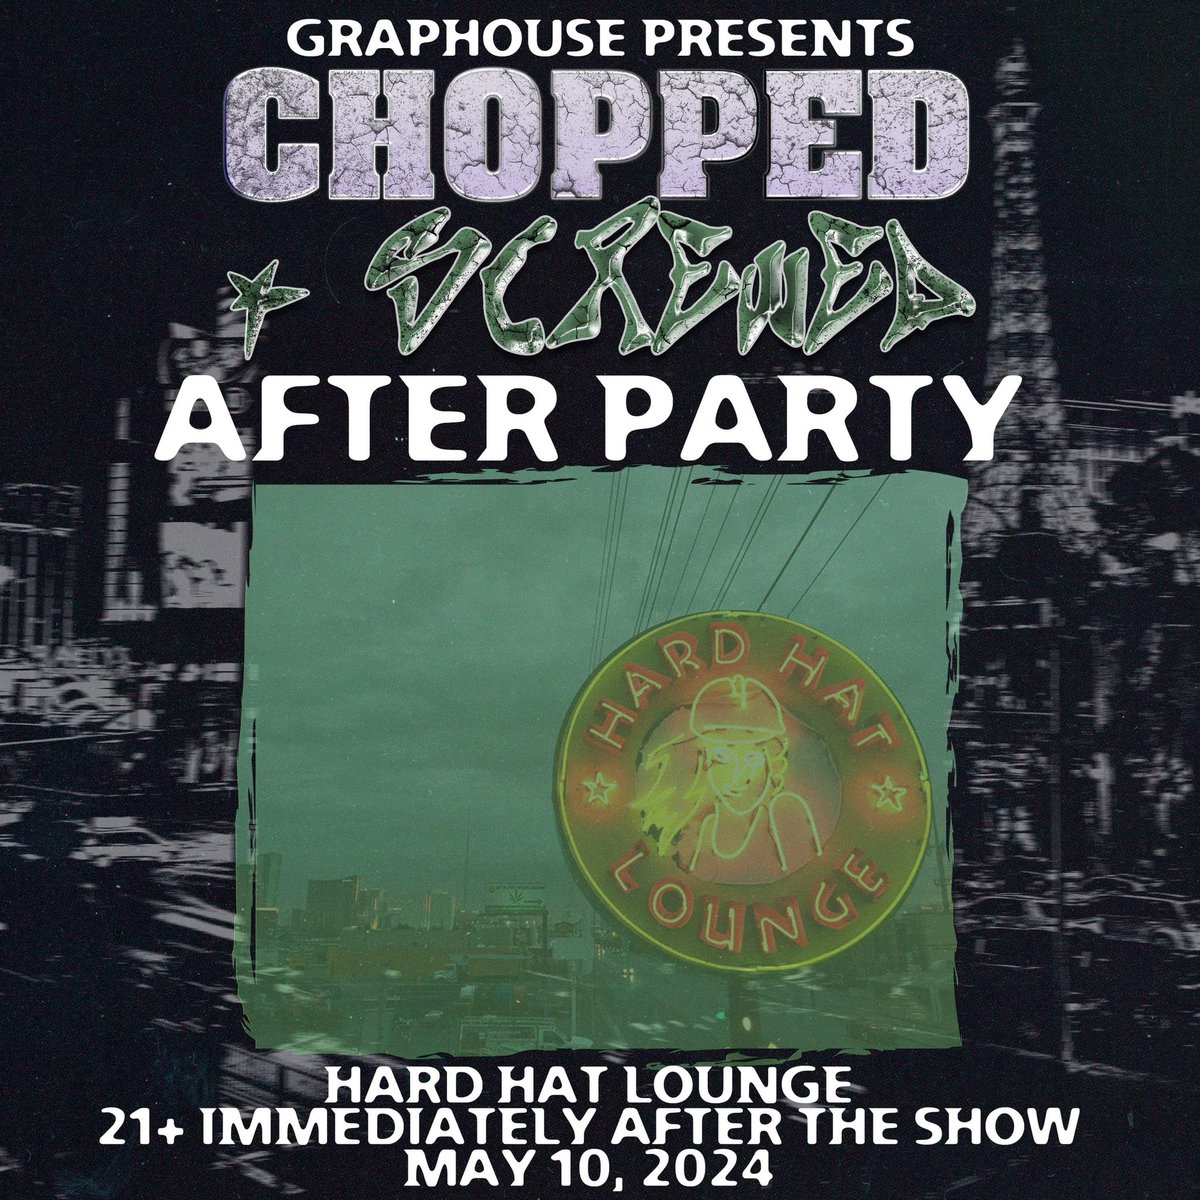 🎉🍻AFTER PARTY ANNOUNCEMENT🍻🎉 In true Vegas spirit, the party NEVER ends 🥳 Join ALL of your GRAPHOUSE favorites at Hard Hat Lounge IMMEDIATELY after CHOPPED & SCREWED 🔩 DRINKS🍹 MUSIC 🎵 & THE BEST BURGER IN VEGAS IMO!!! (provided by Stay Tuned)🍔